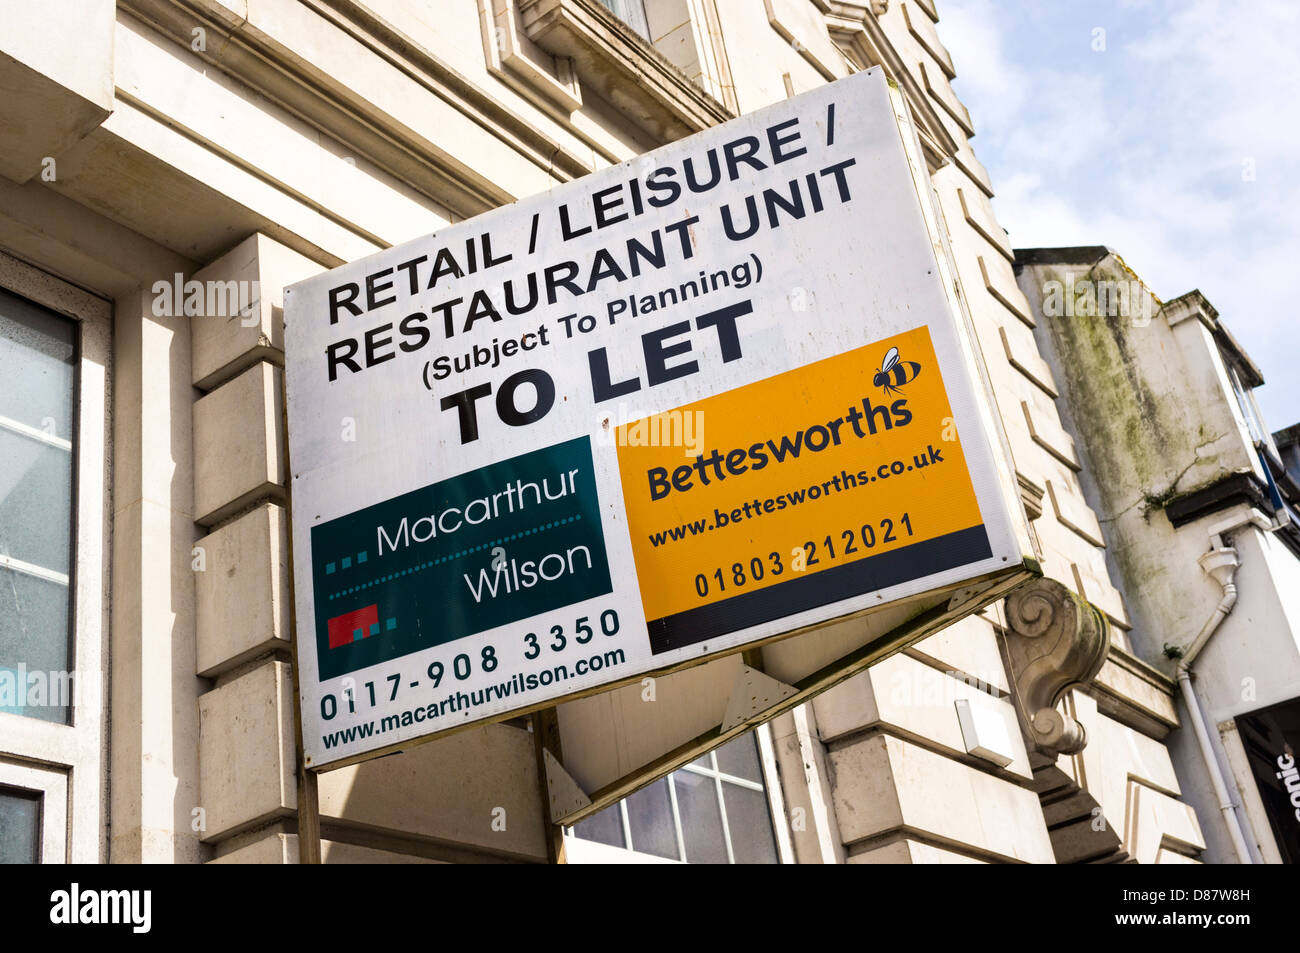 Retail / Leisure / Restaurant commercial unit to let sign on a town centre empty building, UK Stock Photo